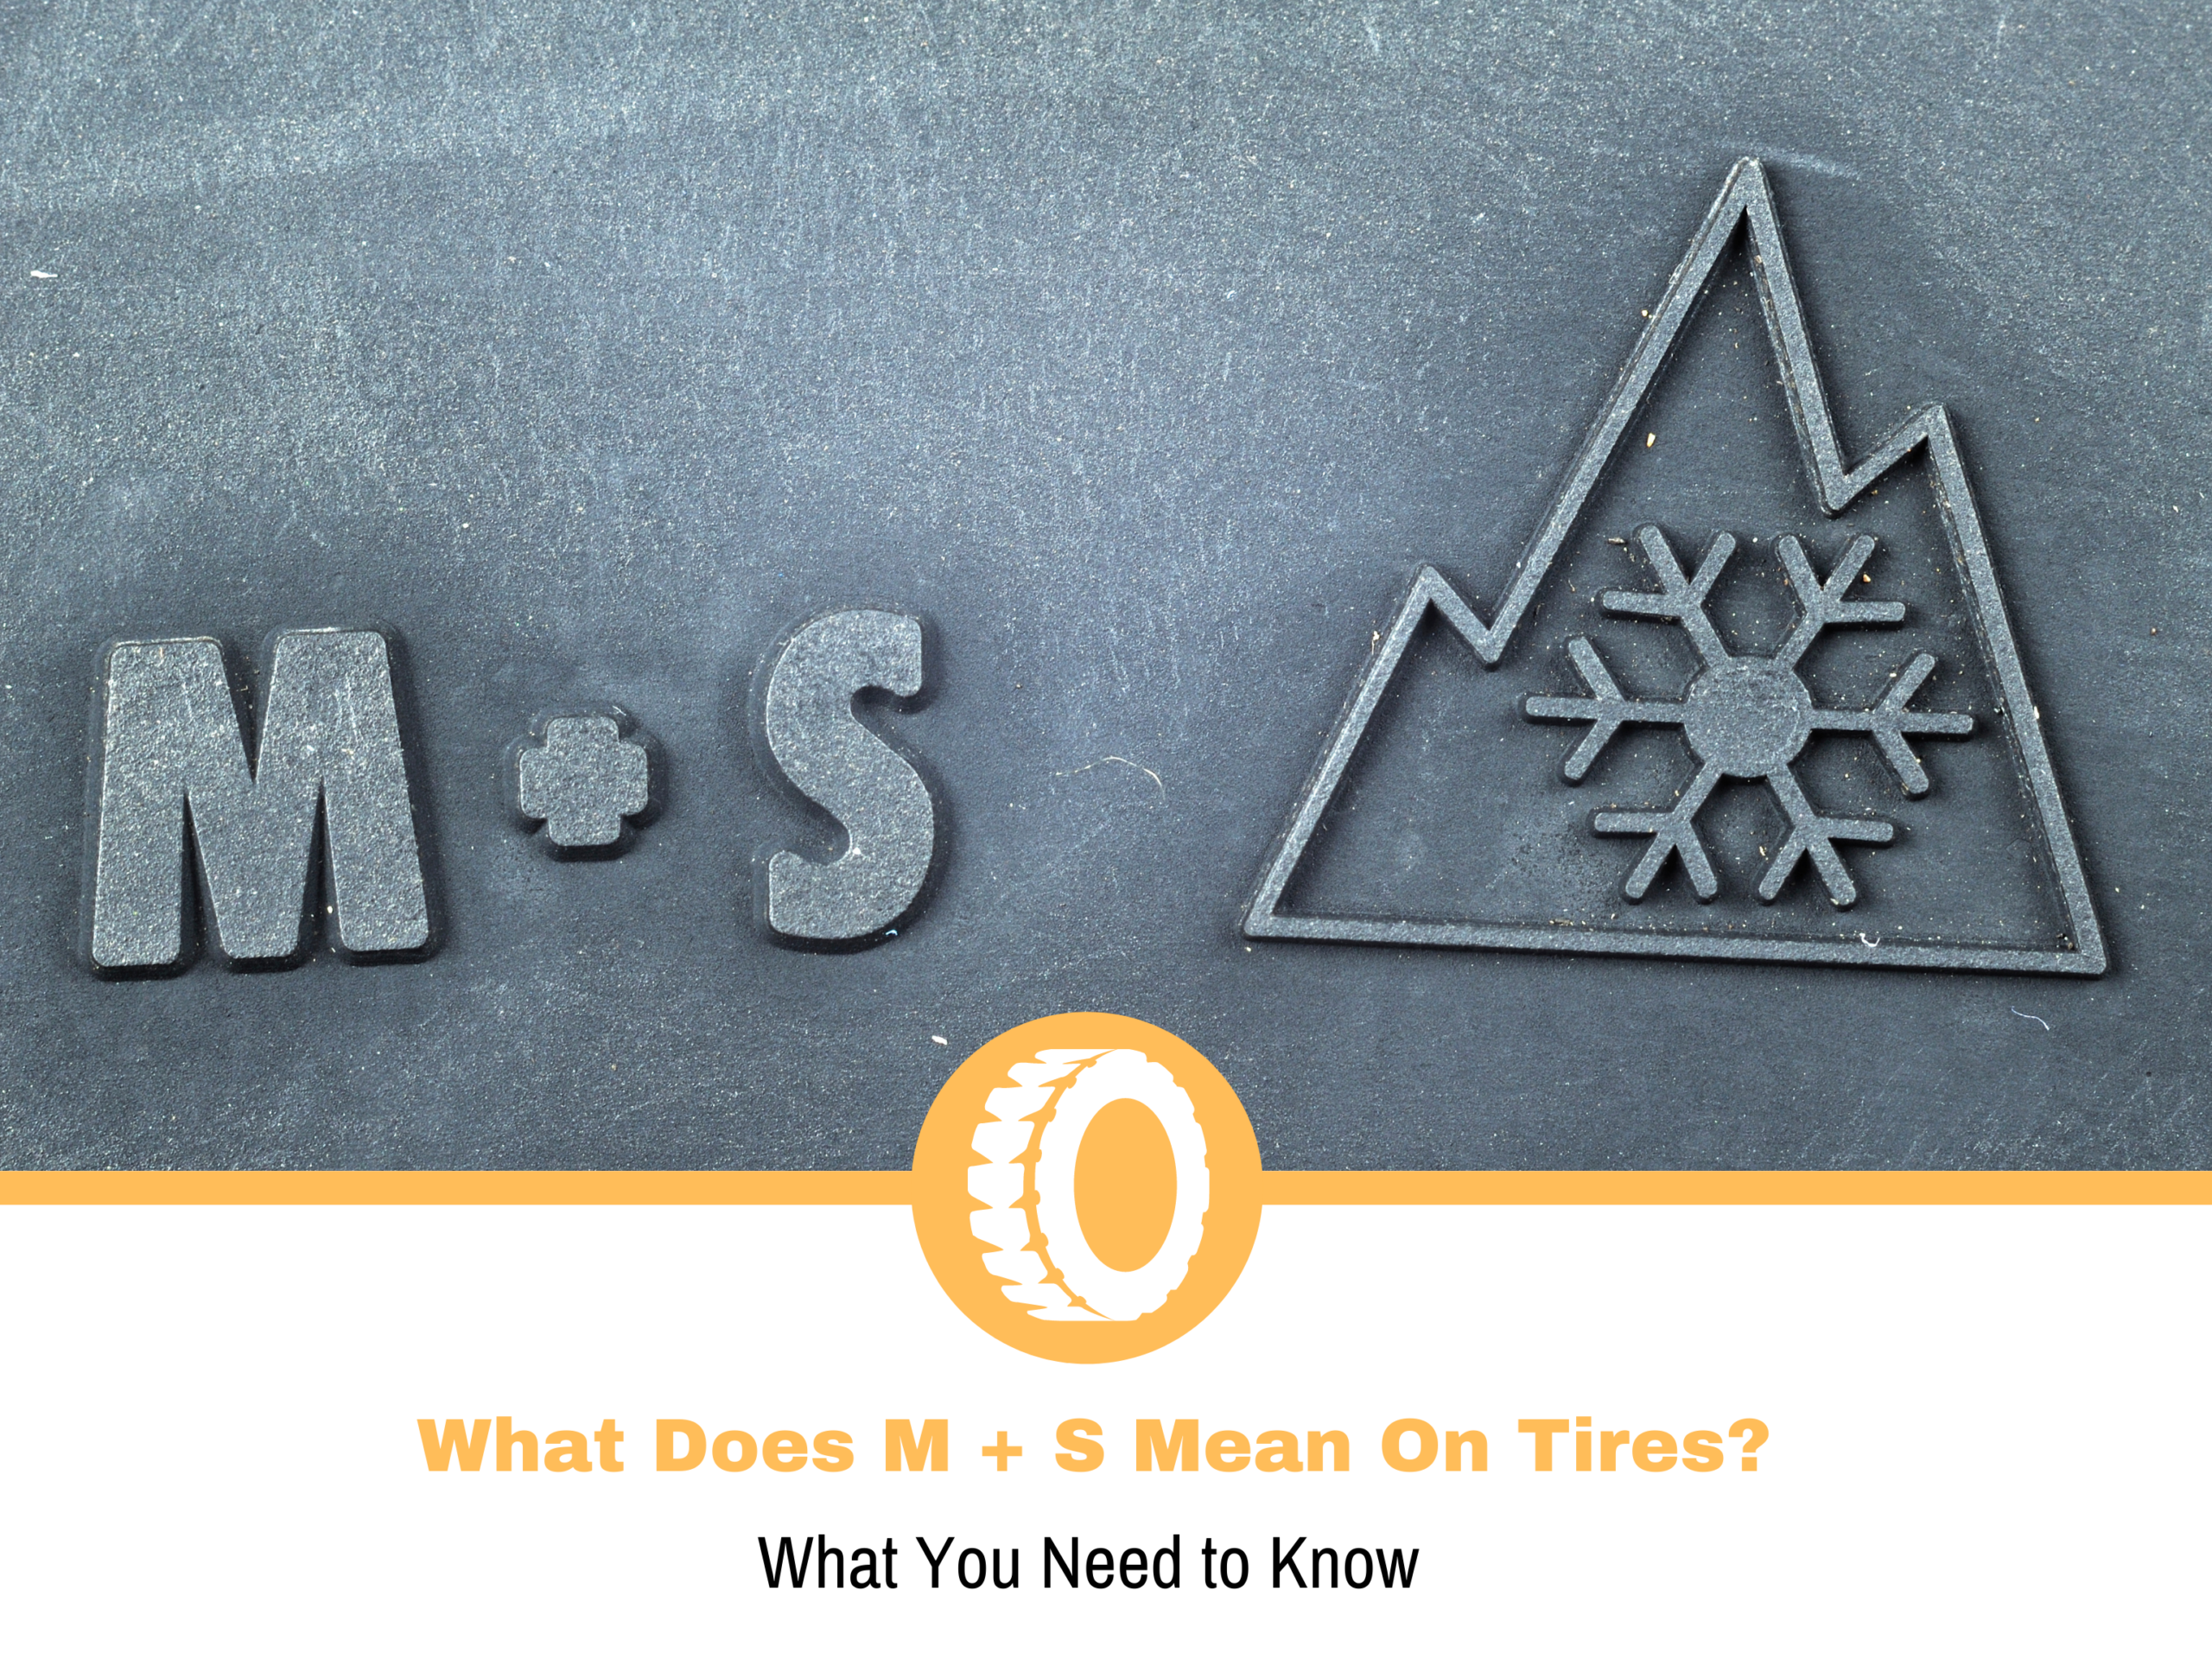 What Does M + S Mean On Tires